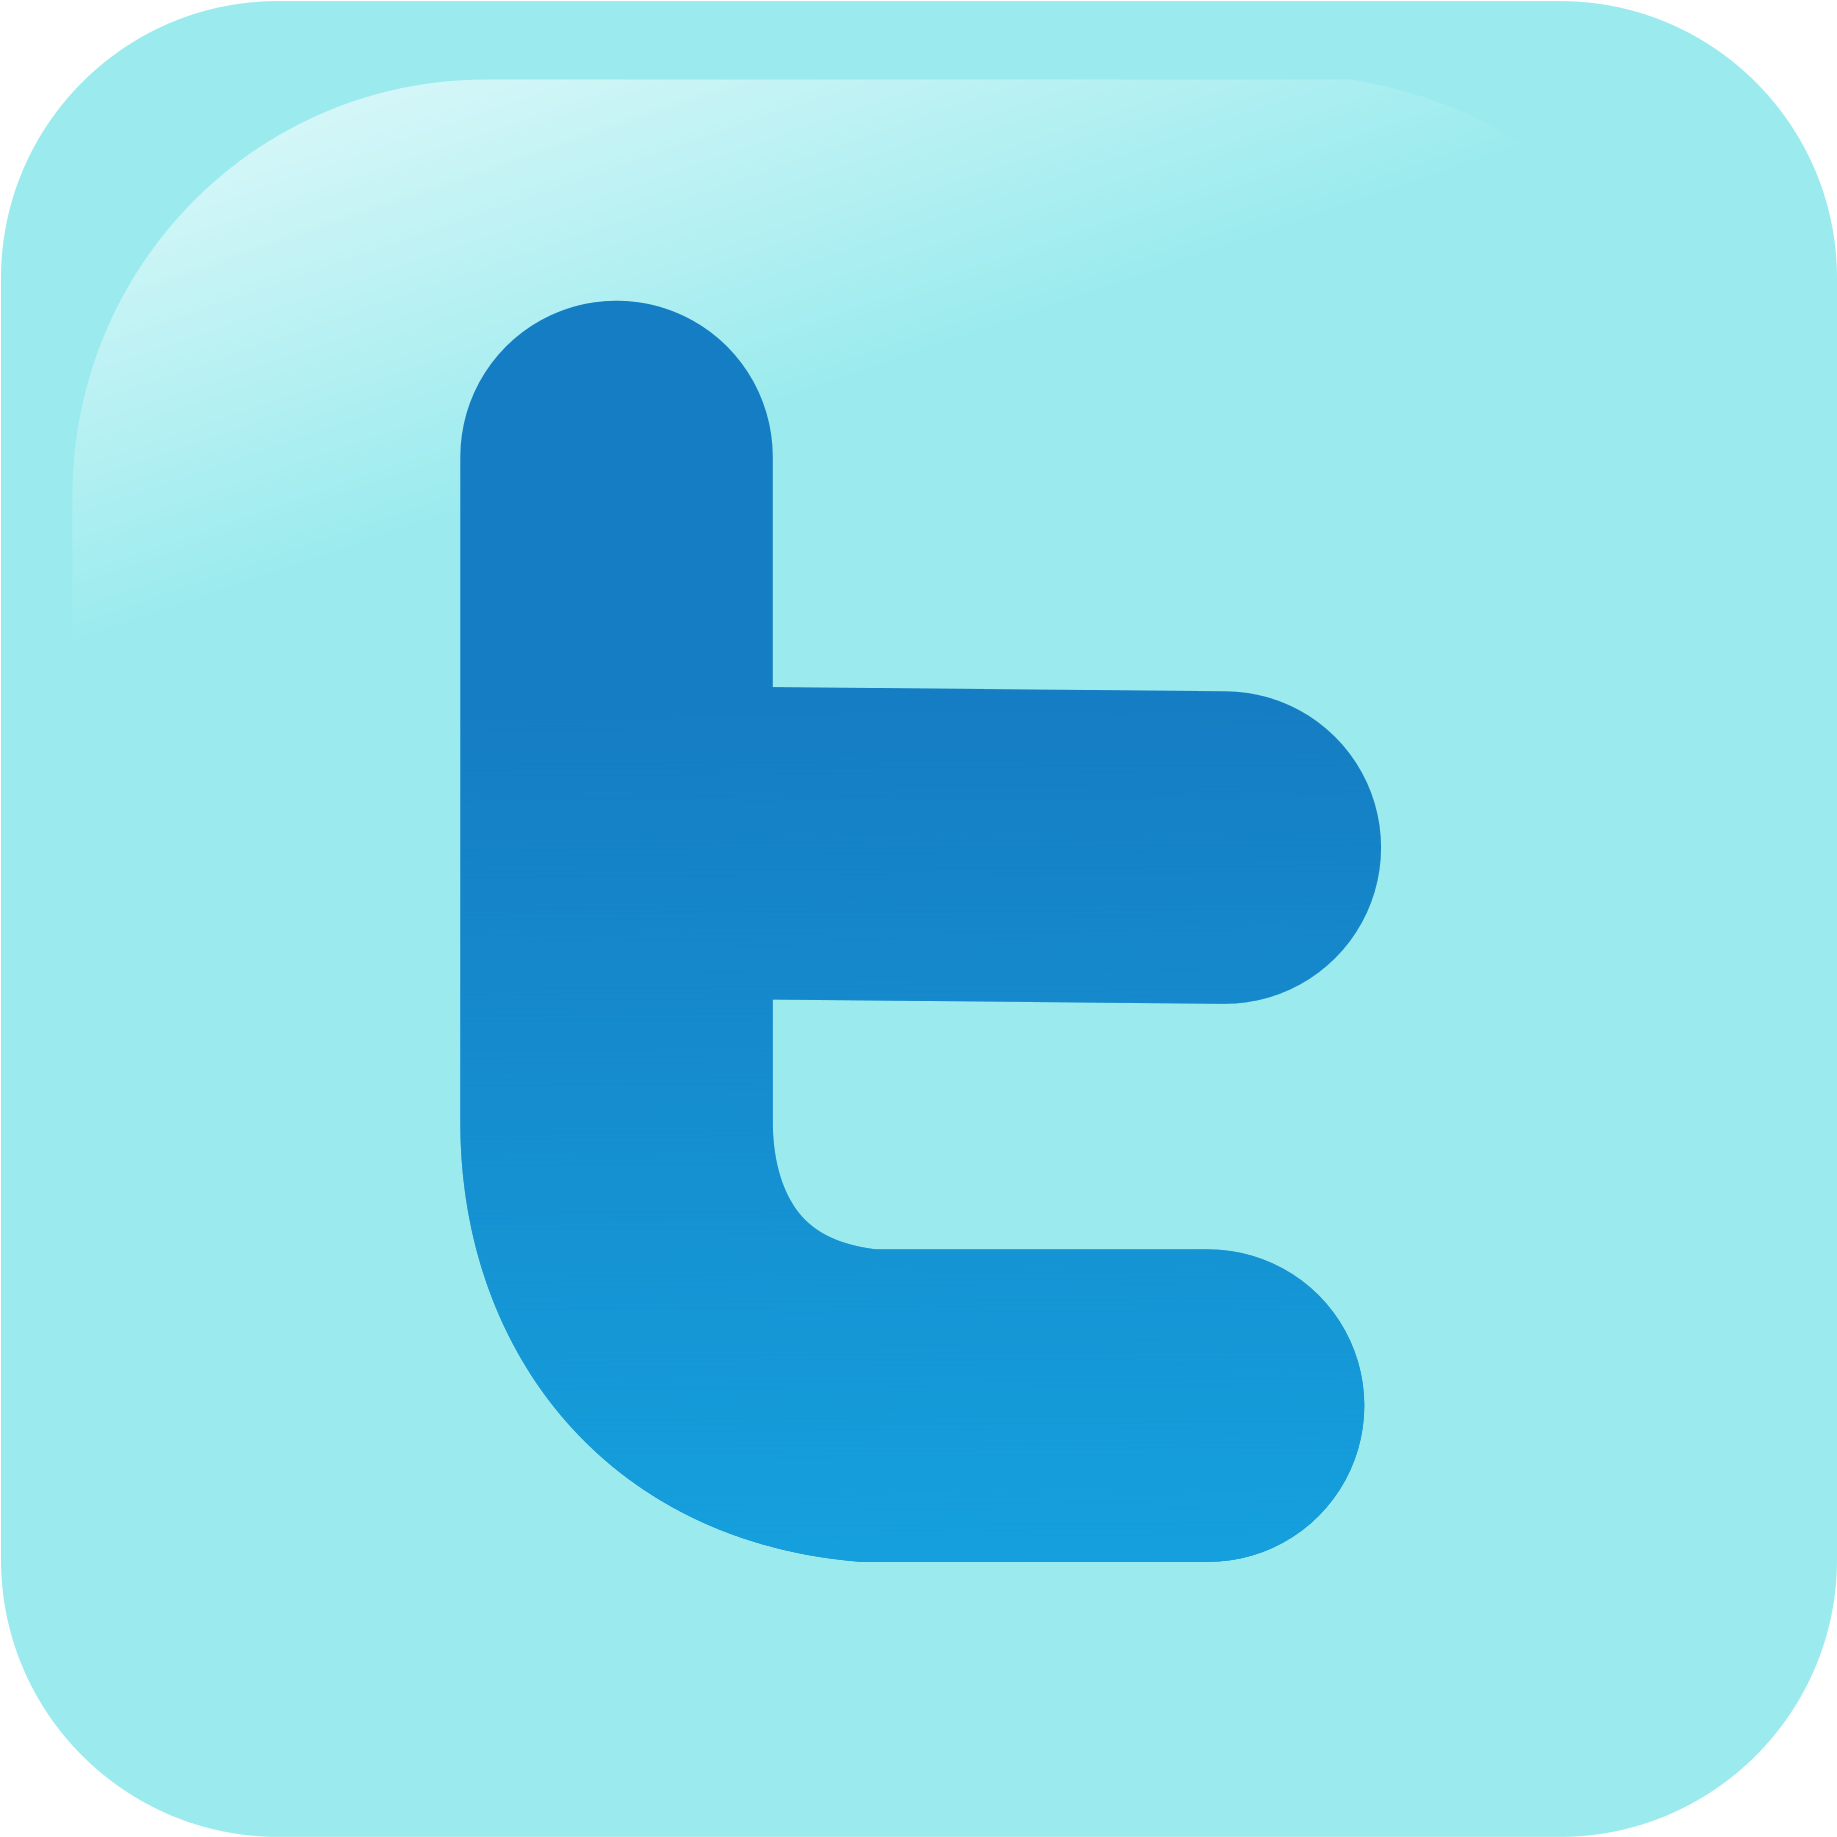 Twitter - Svg - Twitter Icon Wikimedia Commons (2000x2000)